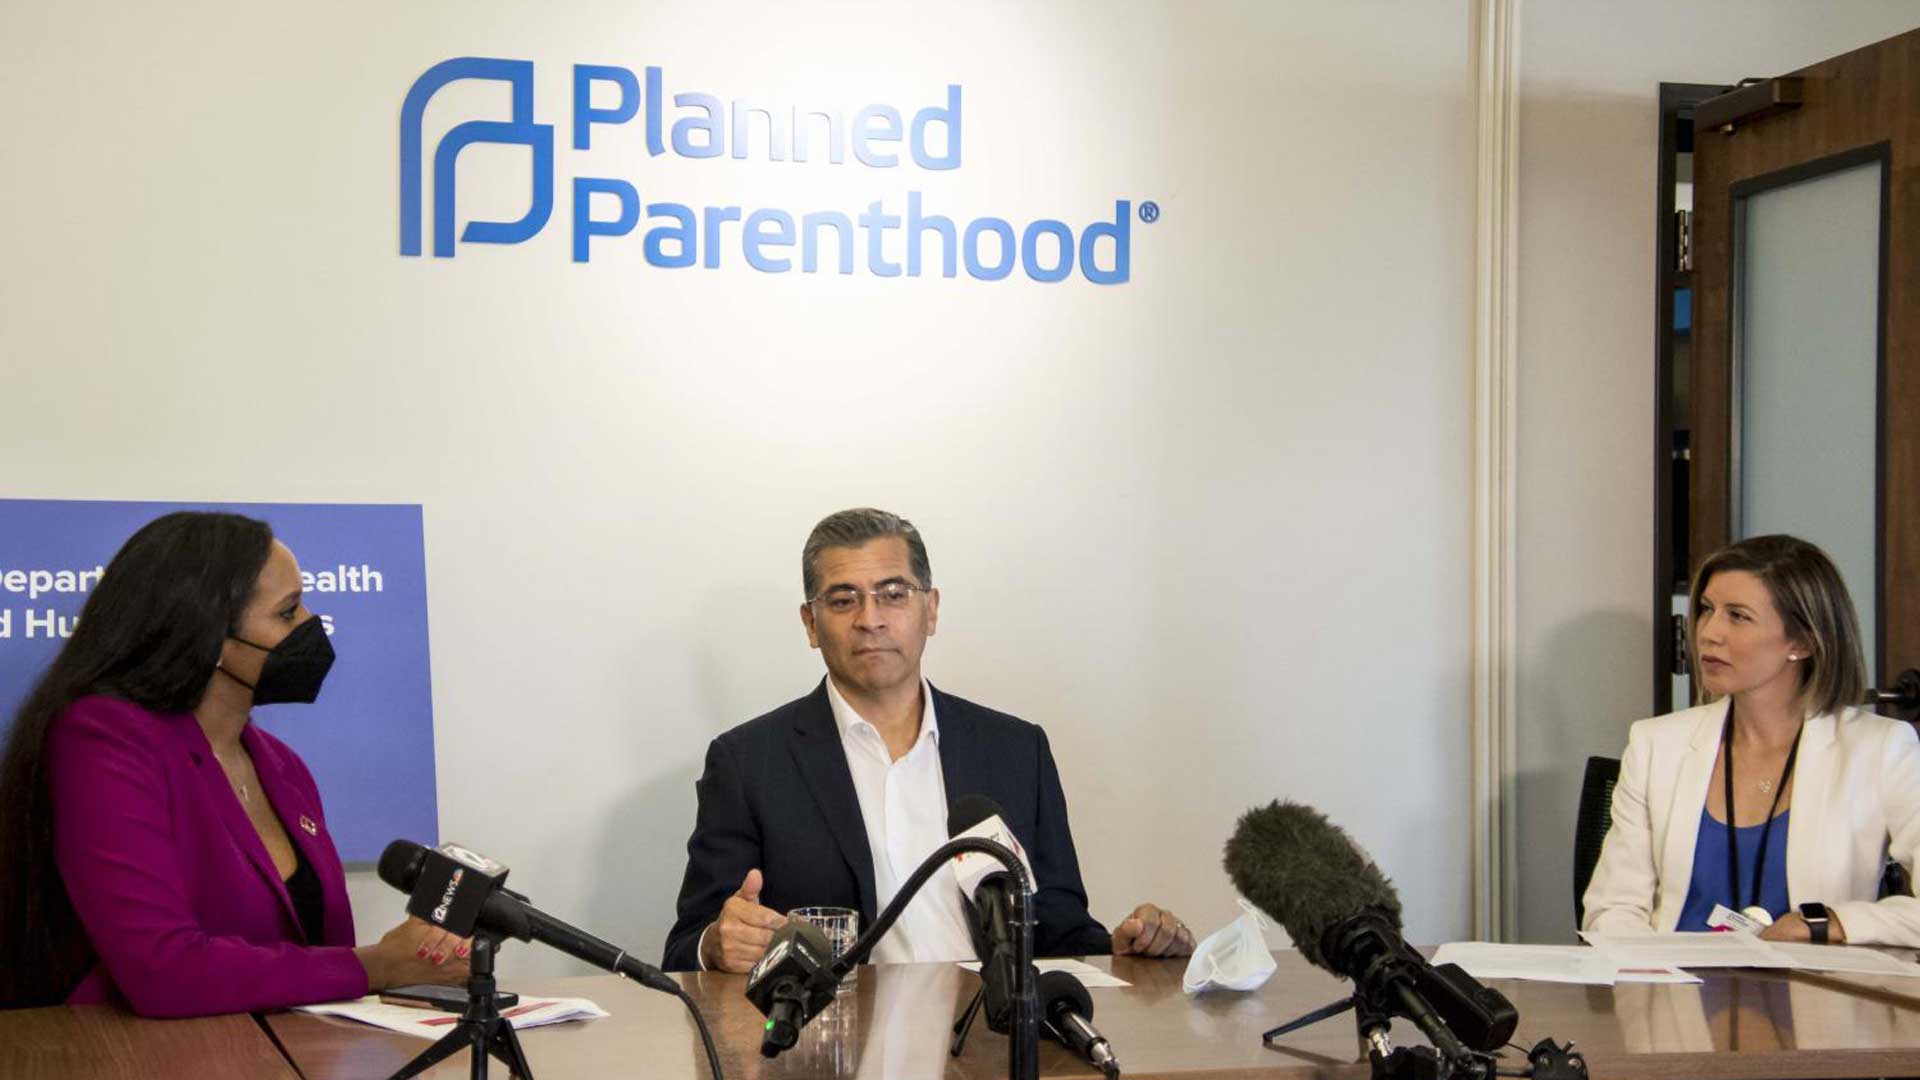 He visited Planned Parenthood in Phoenix.